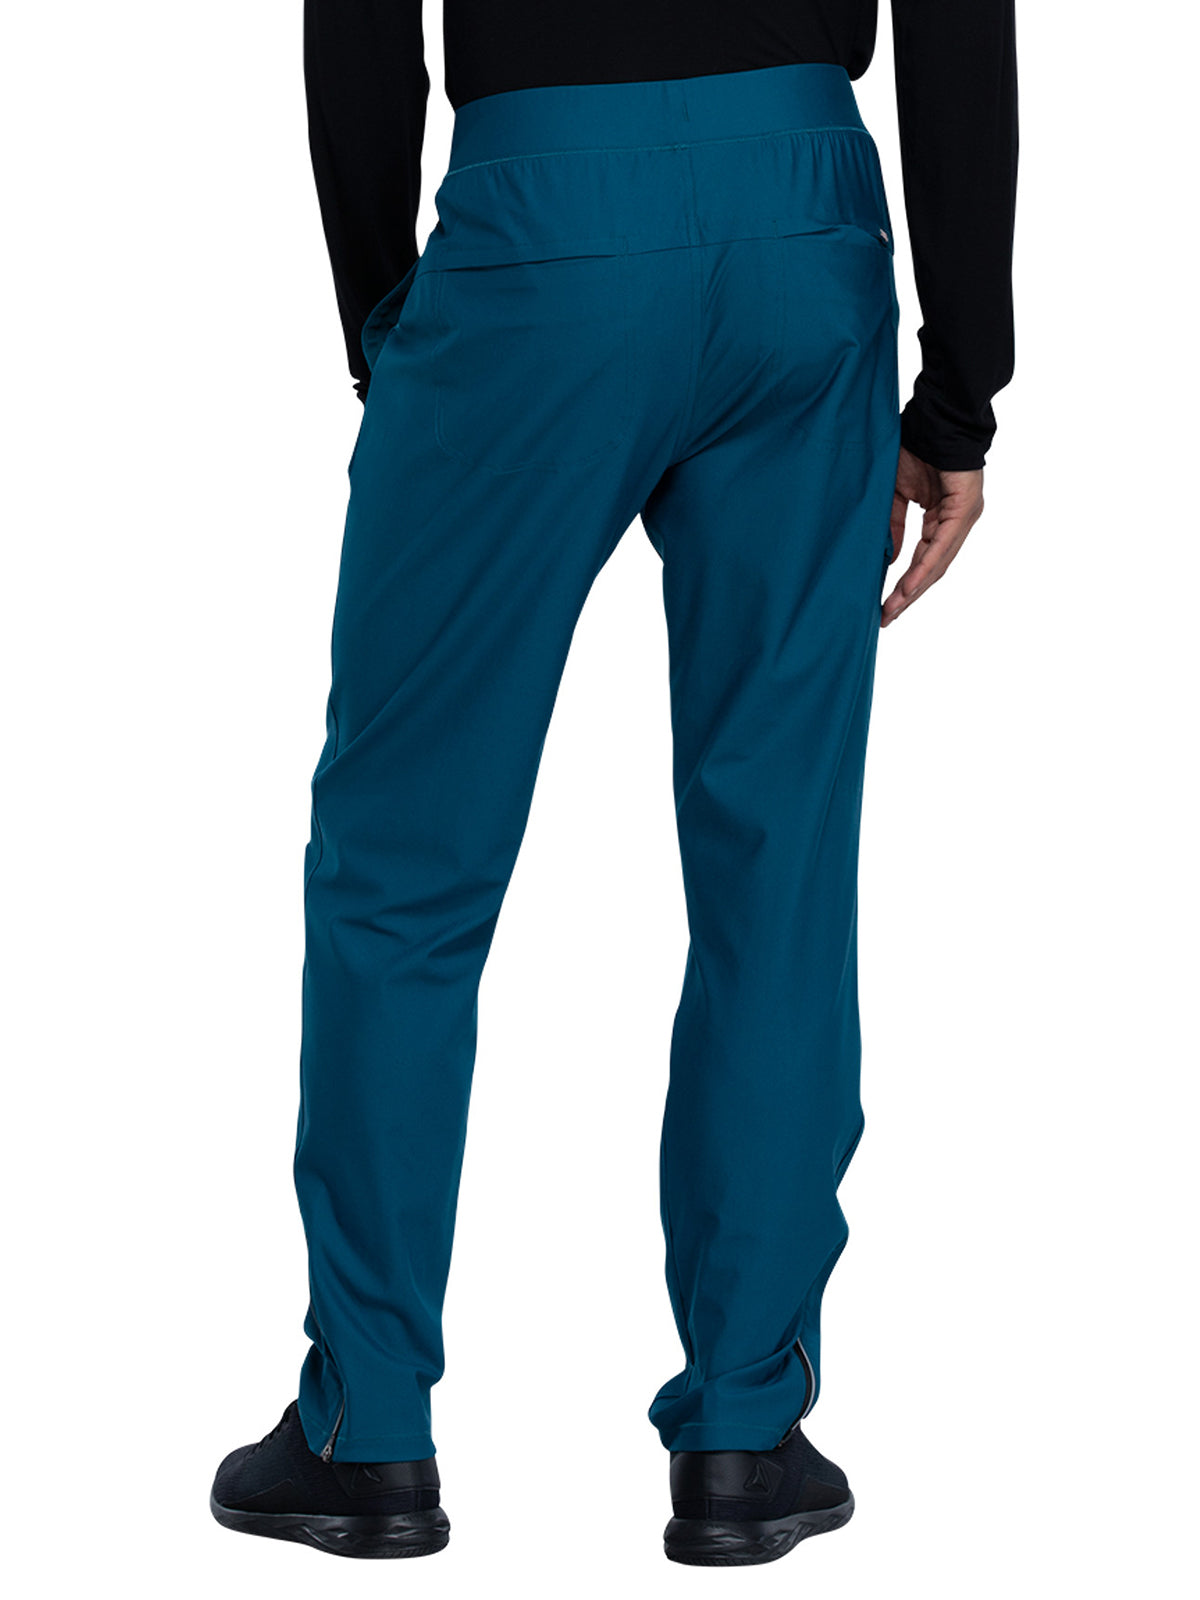 Men's Faux Front Fly Tapered Leg Pull-on Scrub Pant - CK185 - Caribbean Blue